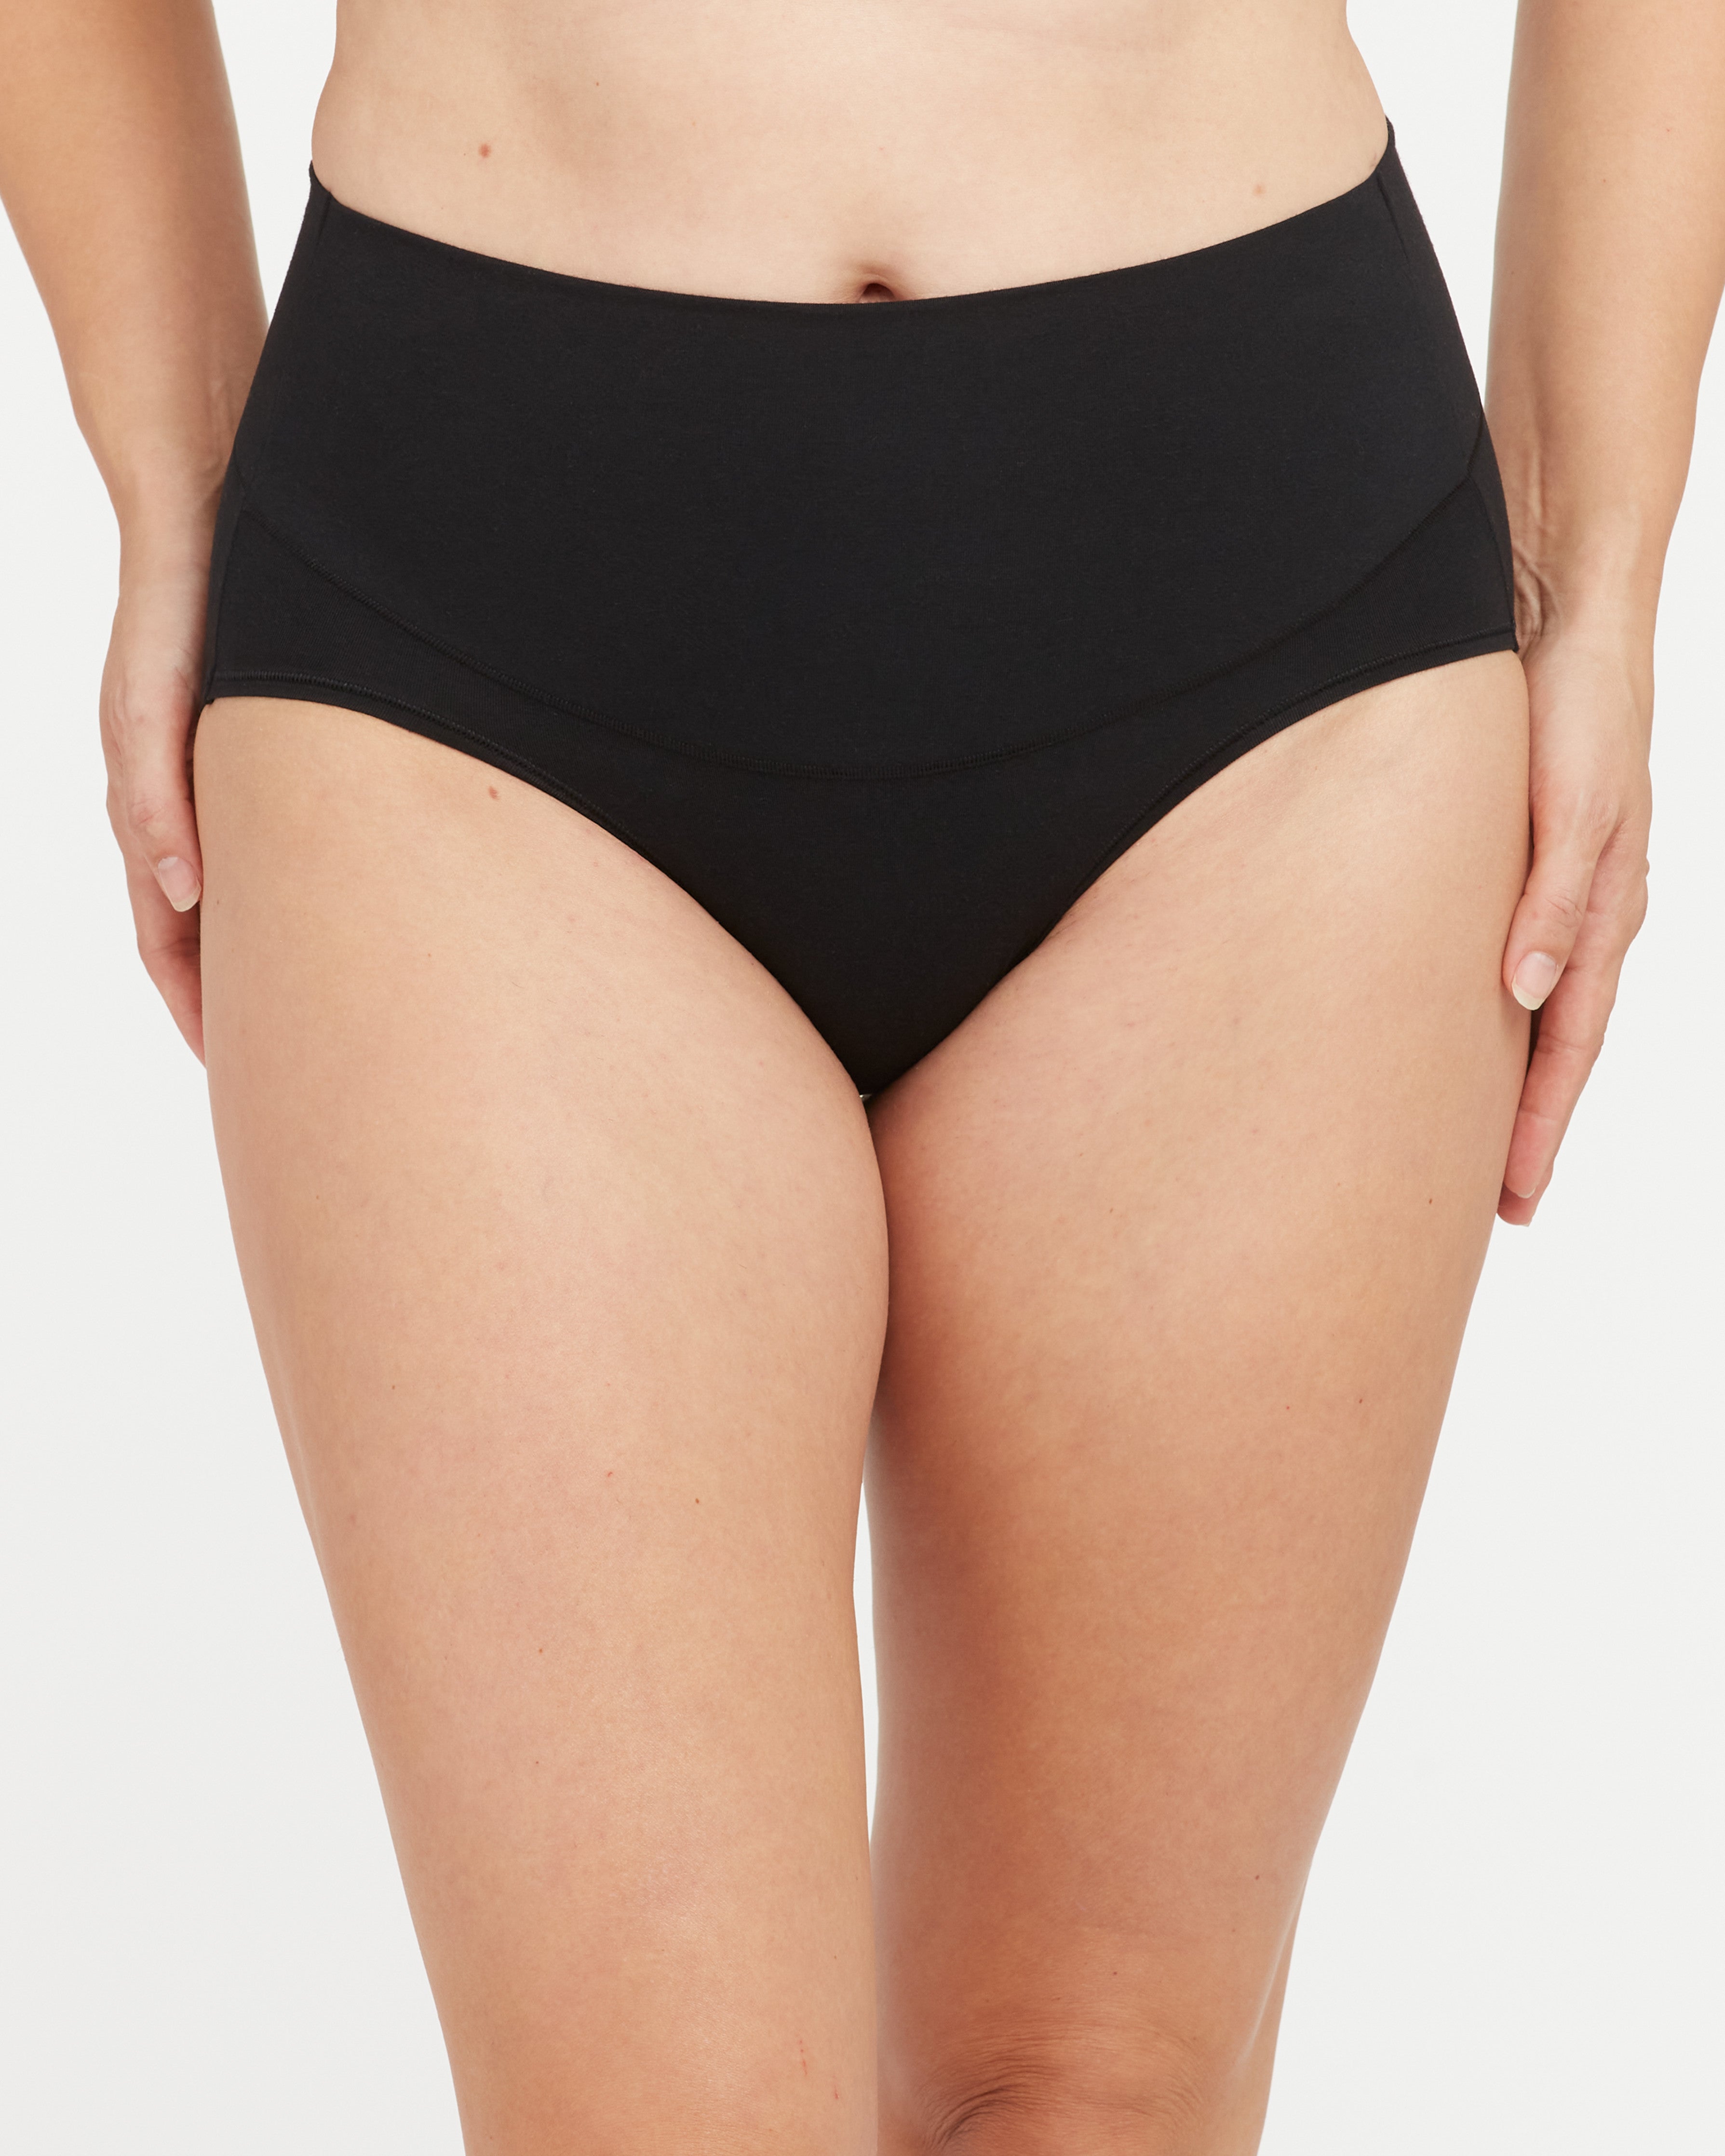 Cotton high-waisted shaping control knickers - tummy control underwear